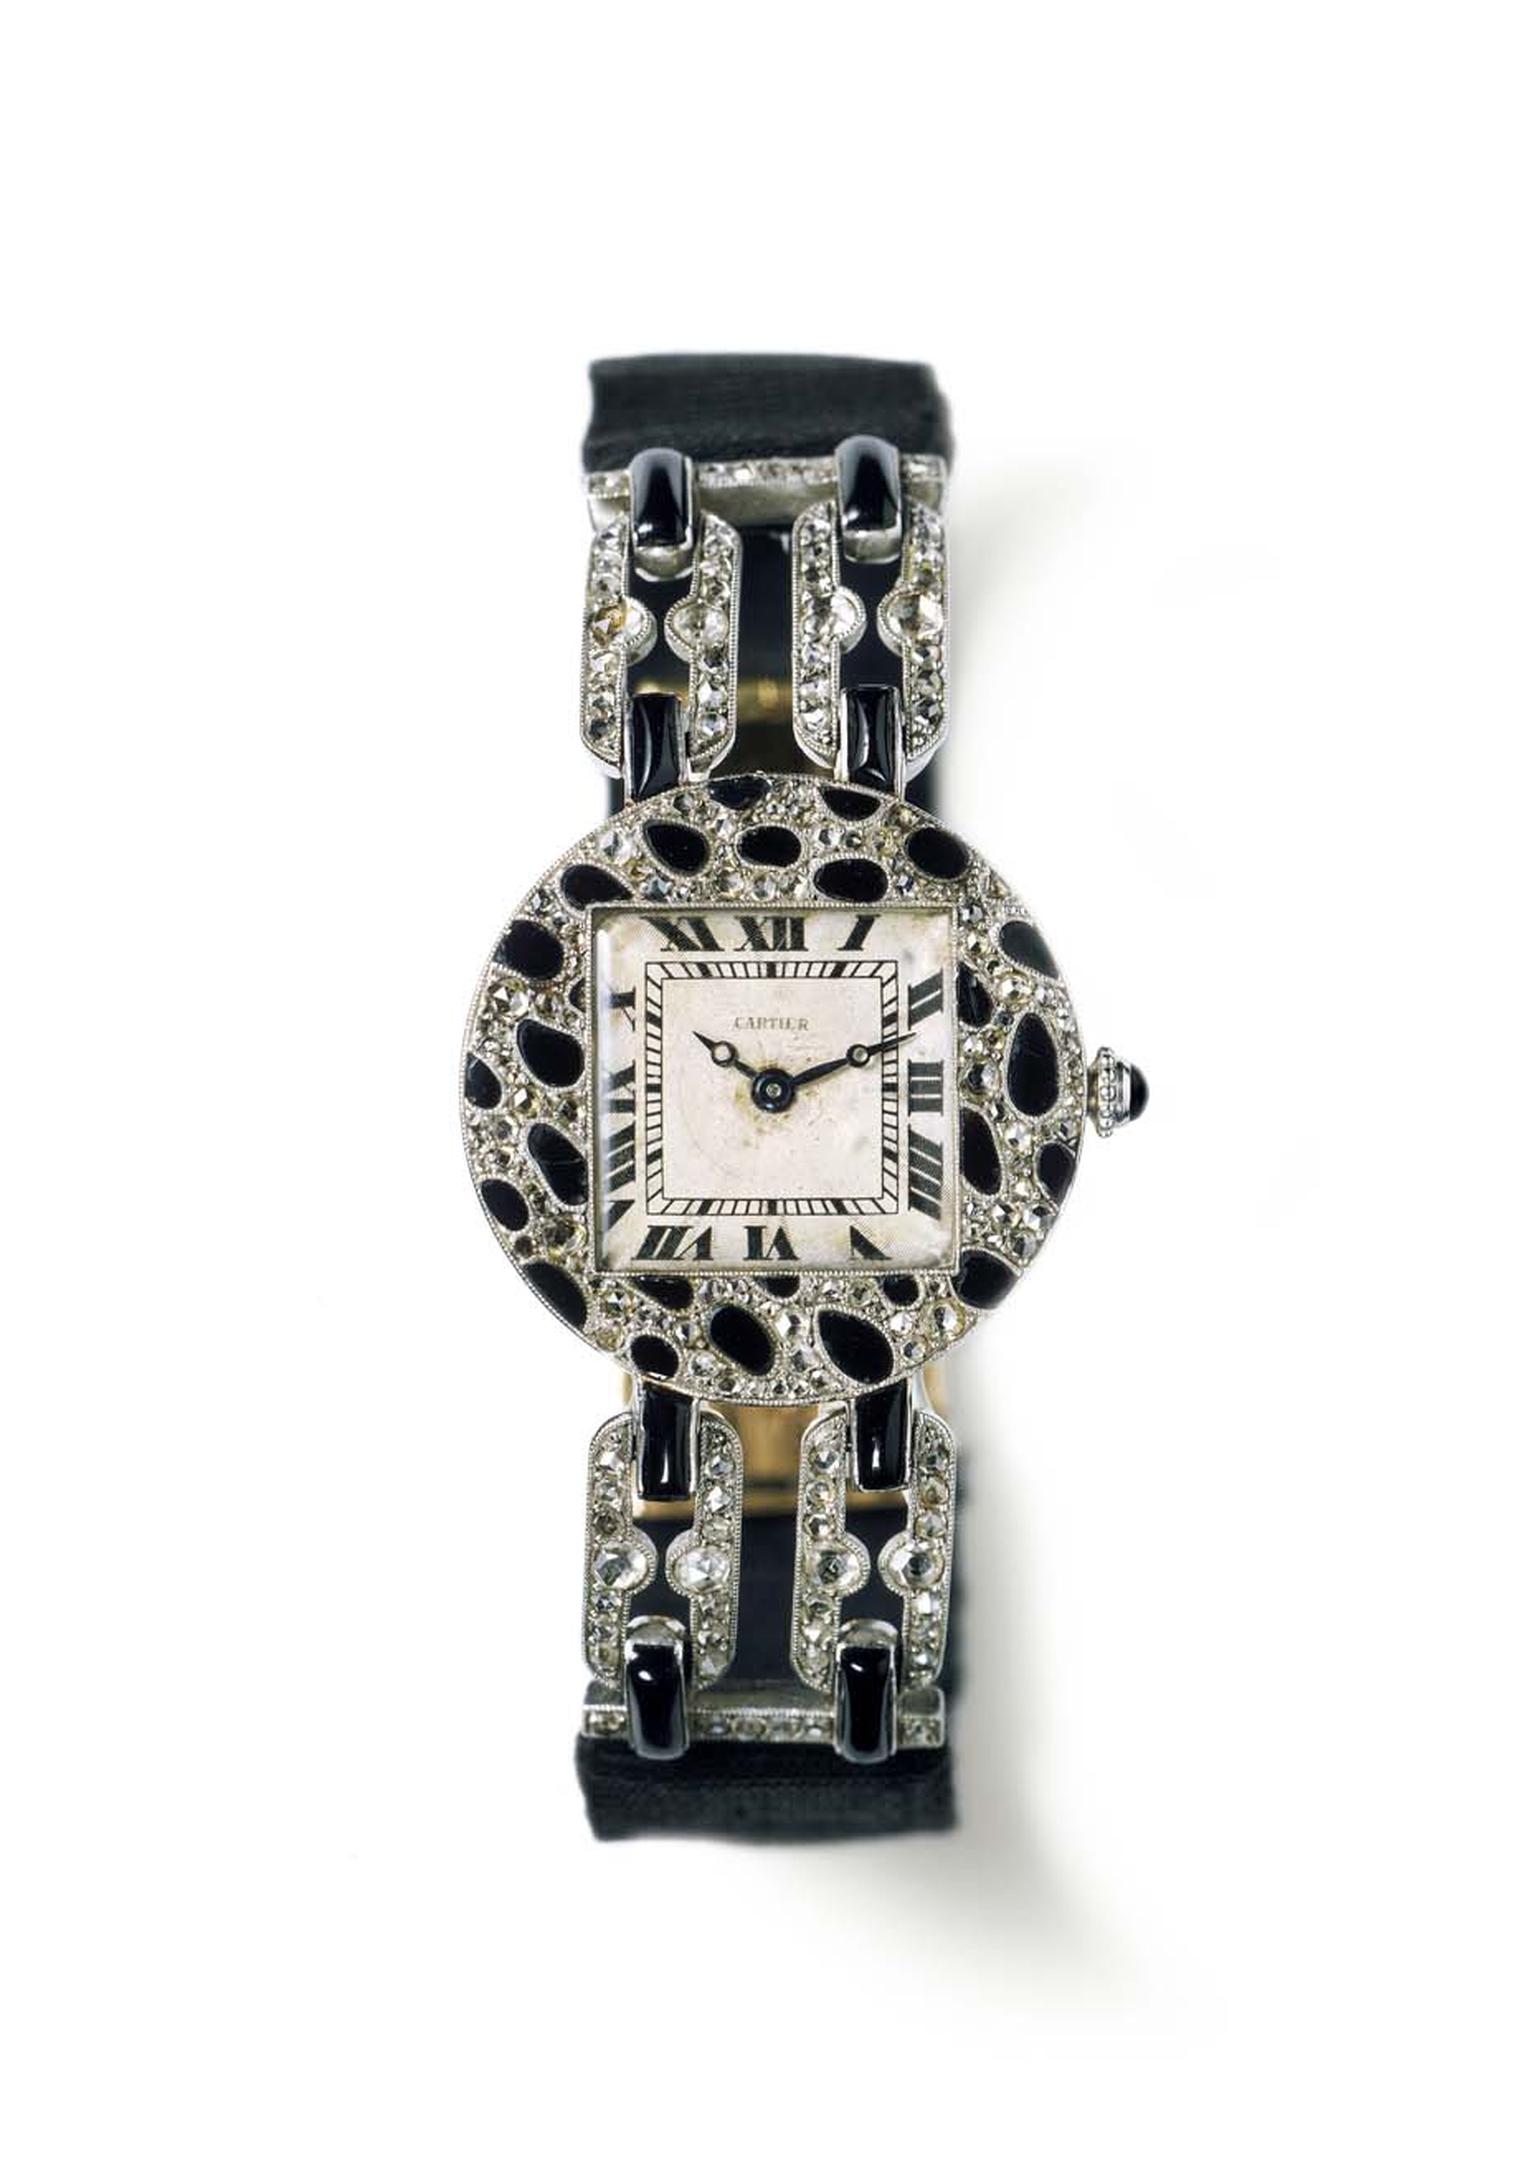 Cartier's 1914 wristwatch with a motif of panther spots, featuring a round case in polished platinum, pavéd with rose-cut diamonds and onyx.